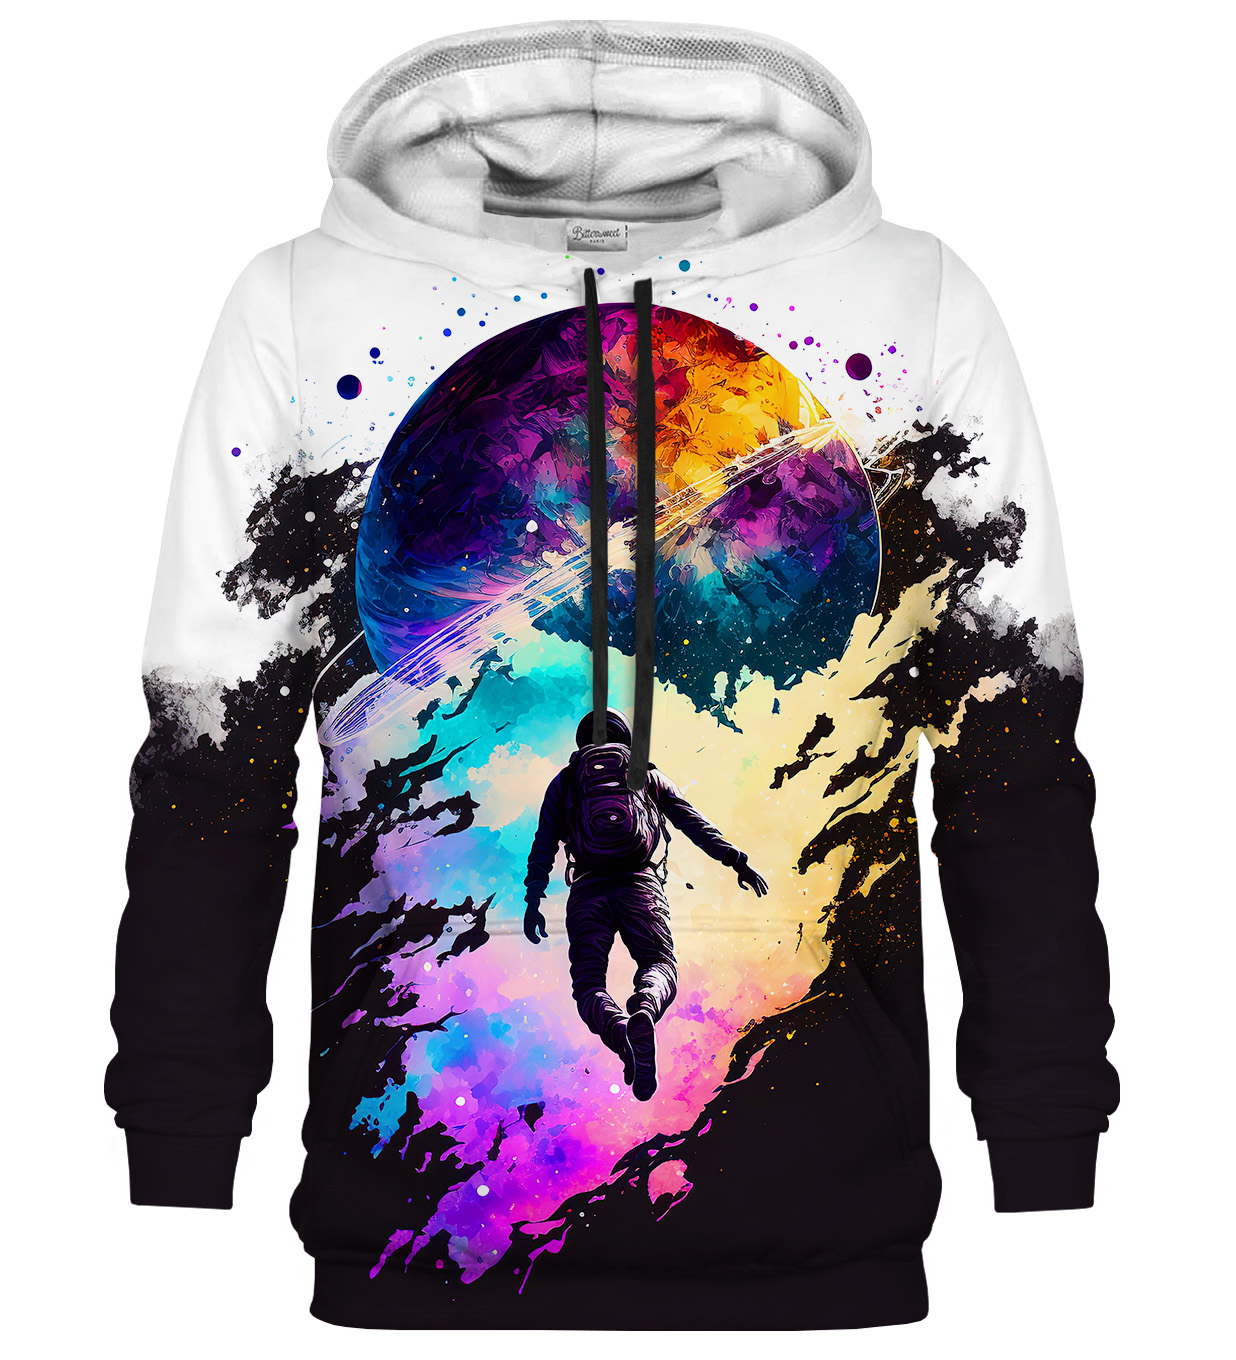 Searching For Colors Hoodie - 3XL